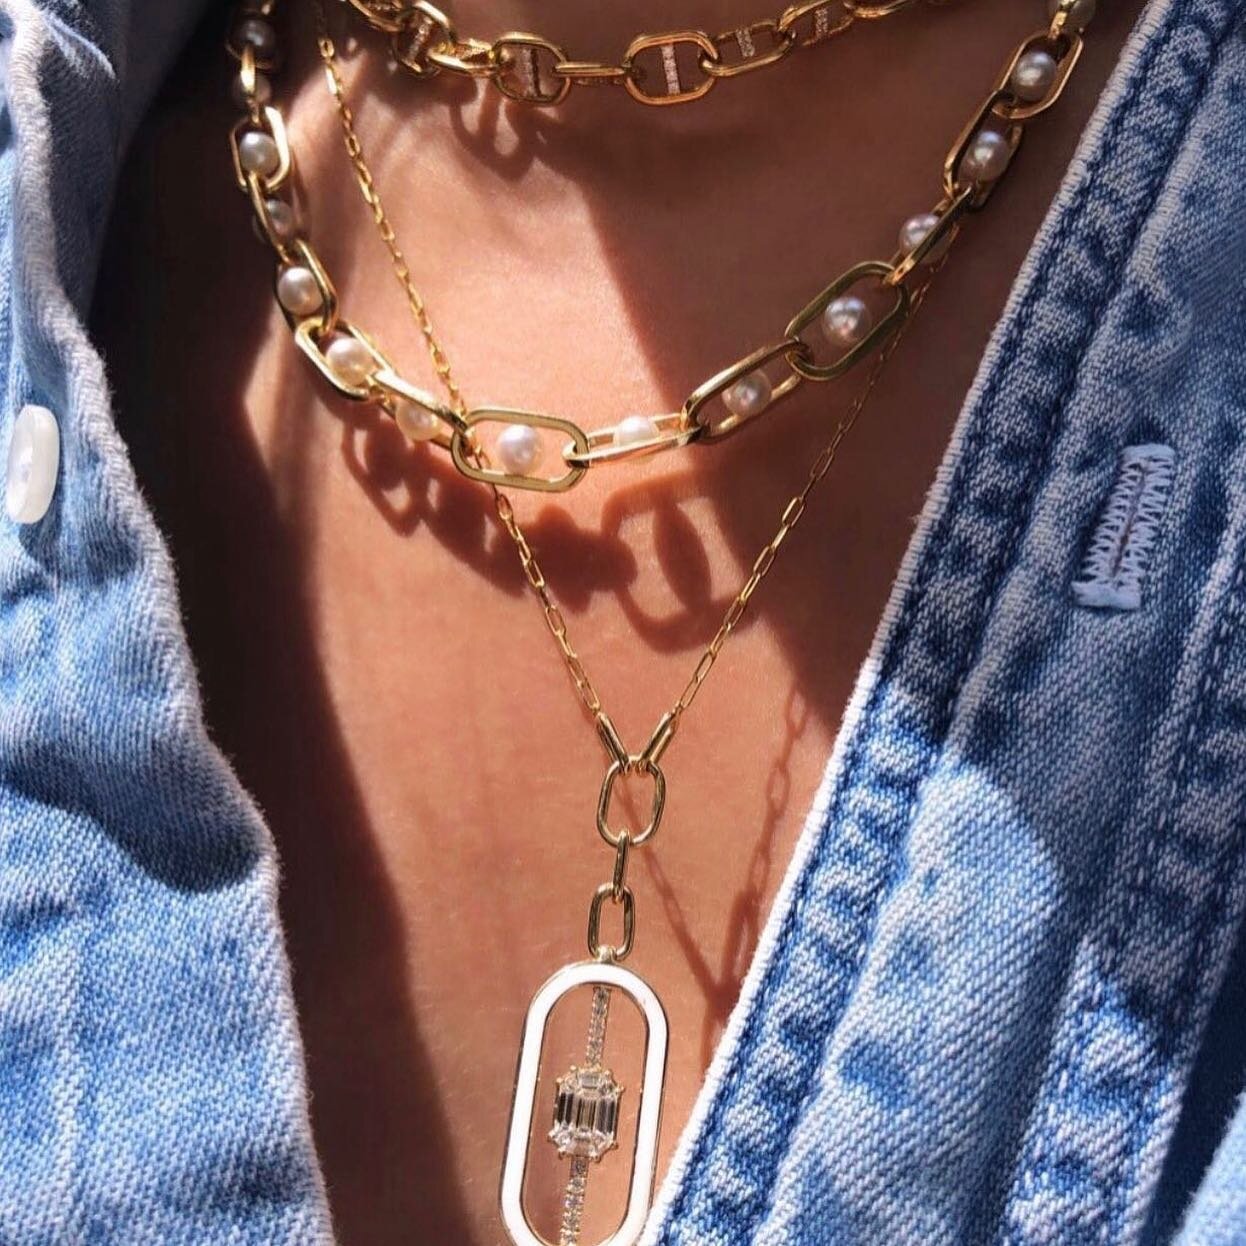 Rocking Sunday casual is our member @thisisstateproperty We love their elegant interpretation of chunky gold chains &amp; the fact that every jewel in their collection is handcrafted in Singapore 🇸🇬 Please swipe left to see their range of enamel of